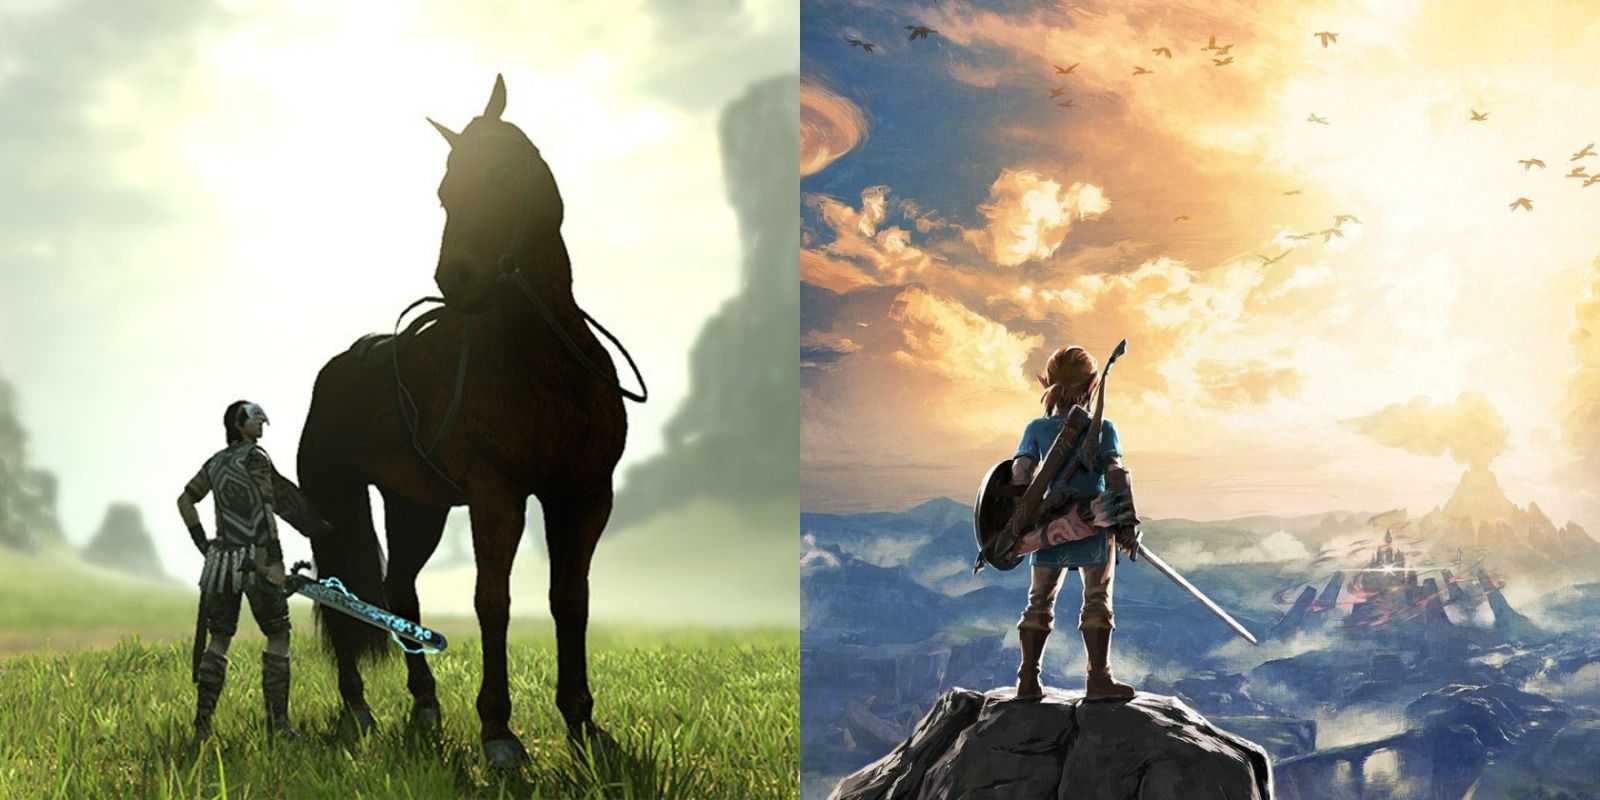 Shadow of the Colossus, Breath of the Wild split